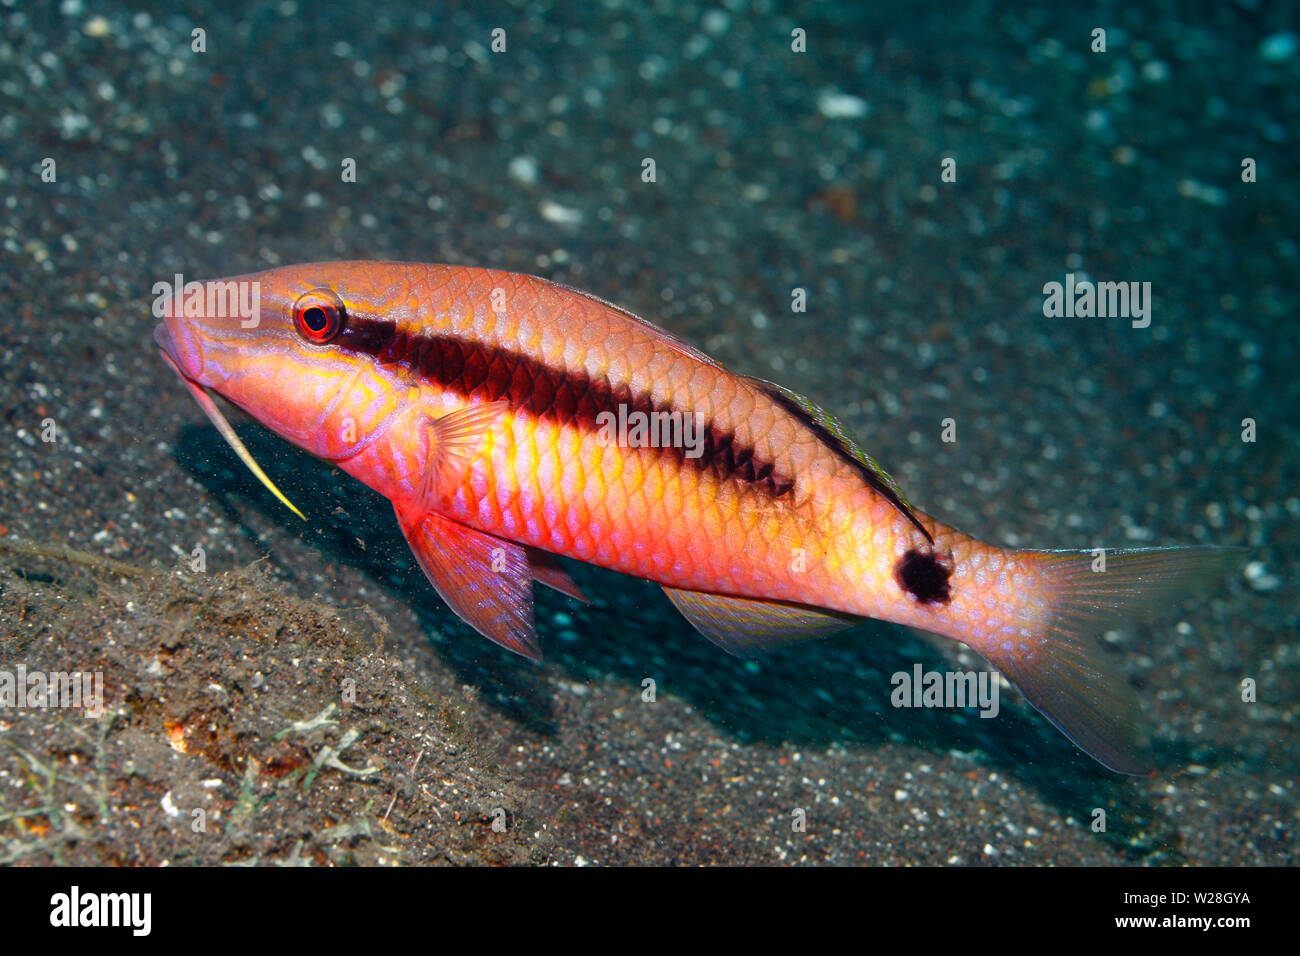 Longbarbel Goatfish, Parupeneus macronemus. The fish has turned a bright pink to attract the services of a nearby cleaner wrasse.Tulamben, Bali Stock Photo